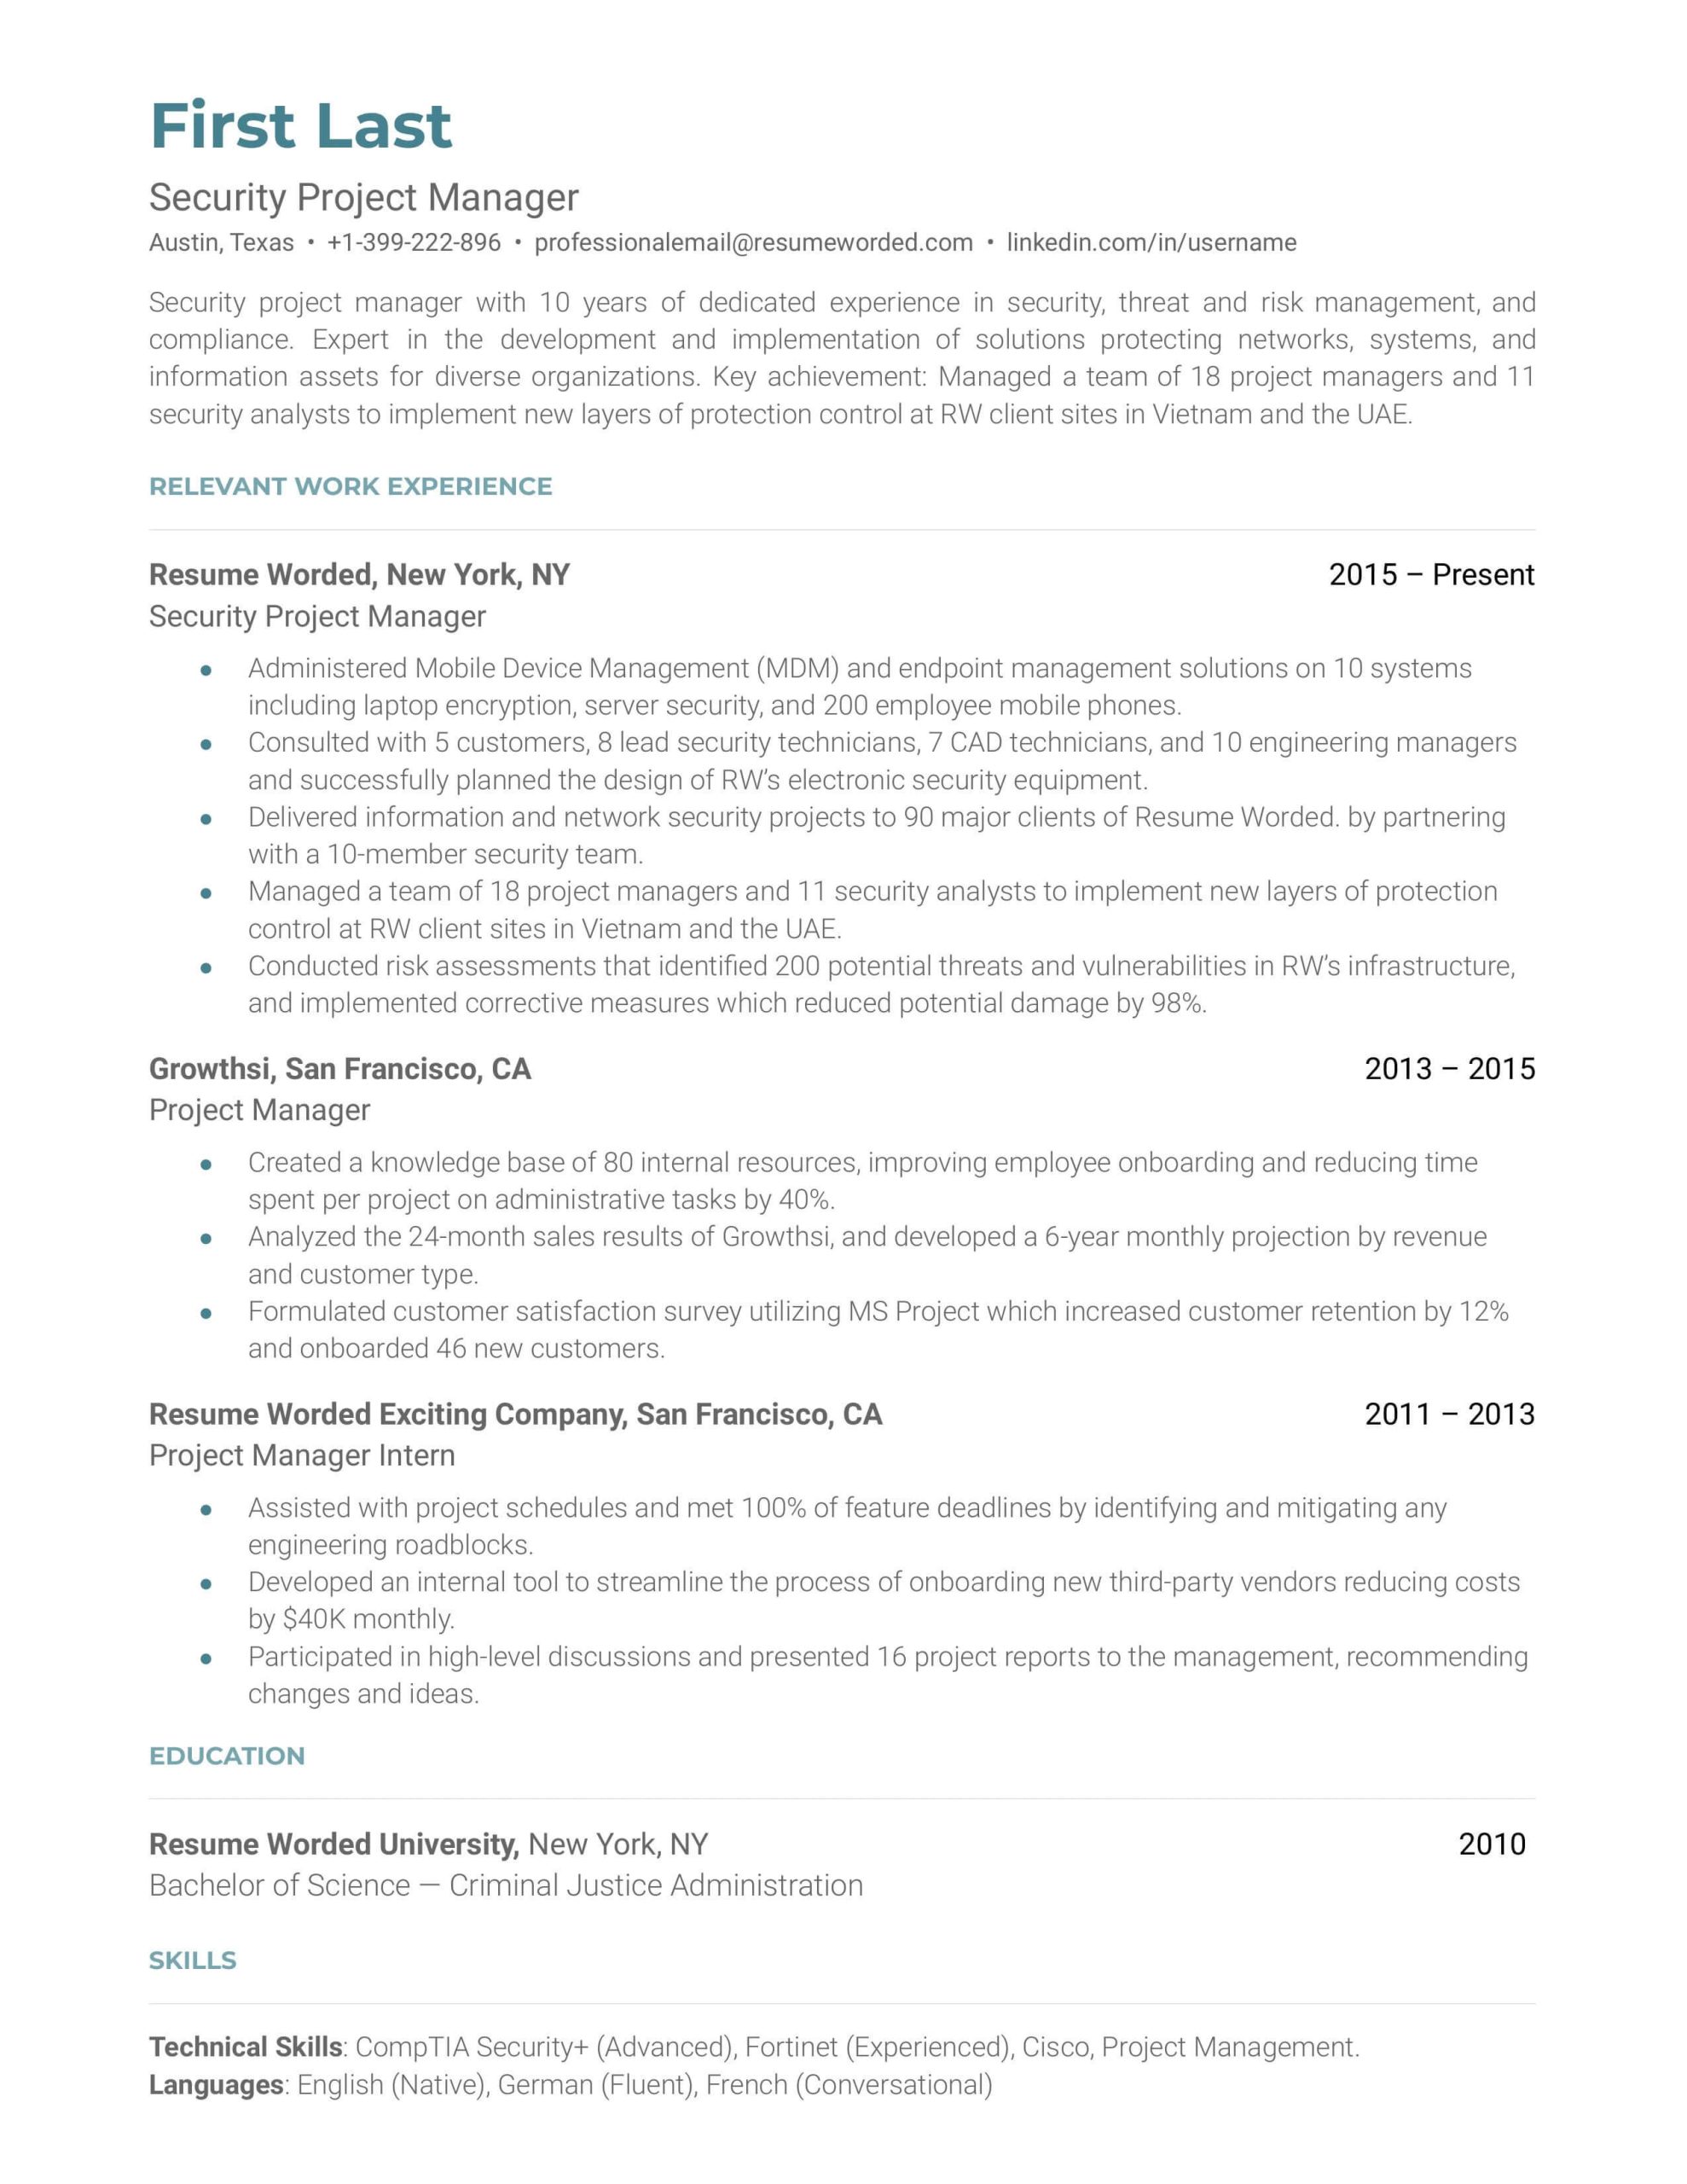 Sample Resume for Security System Technician Security Project Manager Resume Example for 2022 Resume Worded